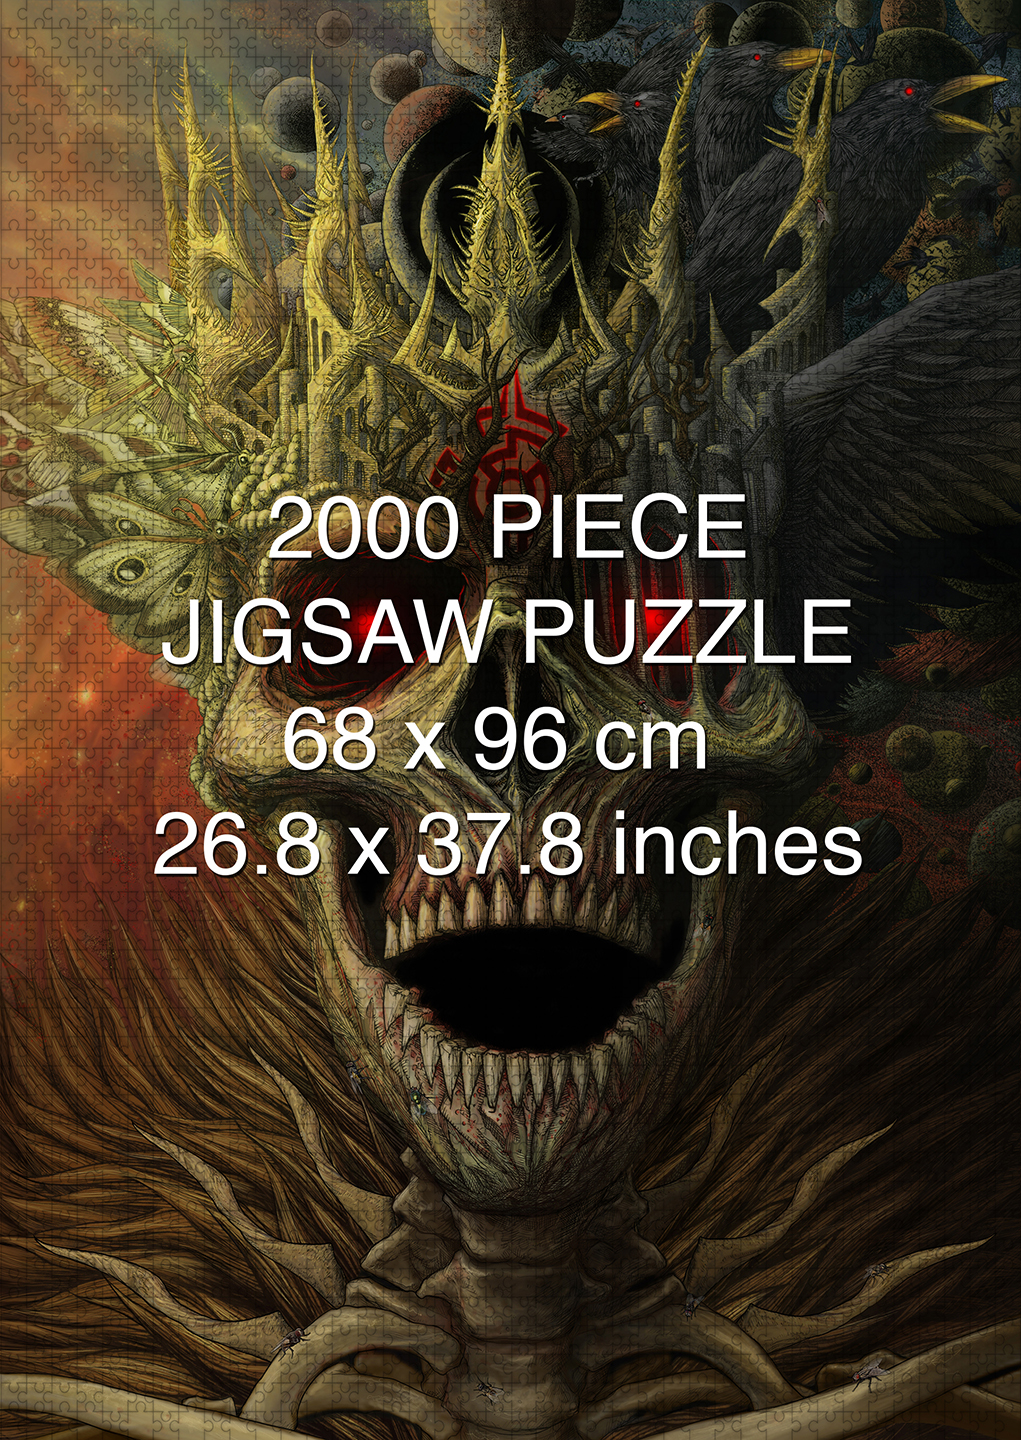 King of the Dead 2000 piece puzzle by Aaron Wolf and Pandemic Puzzles